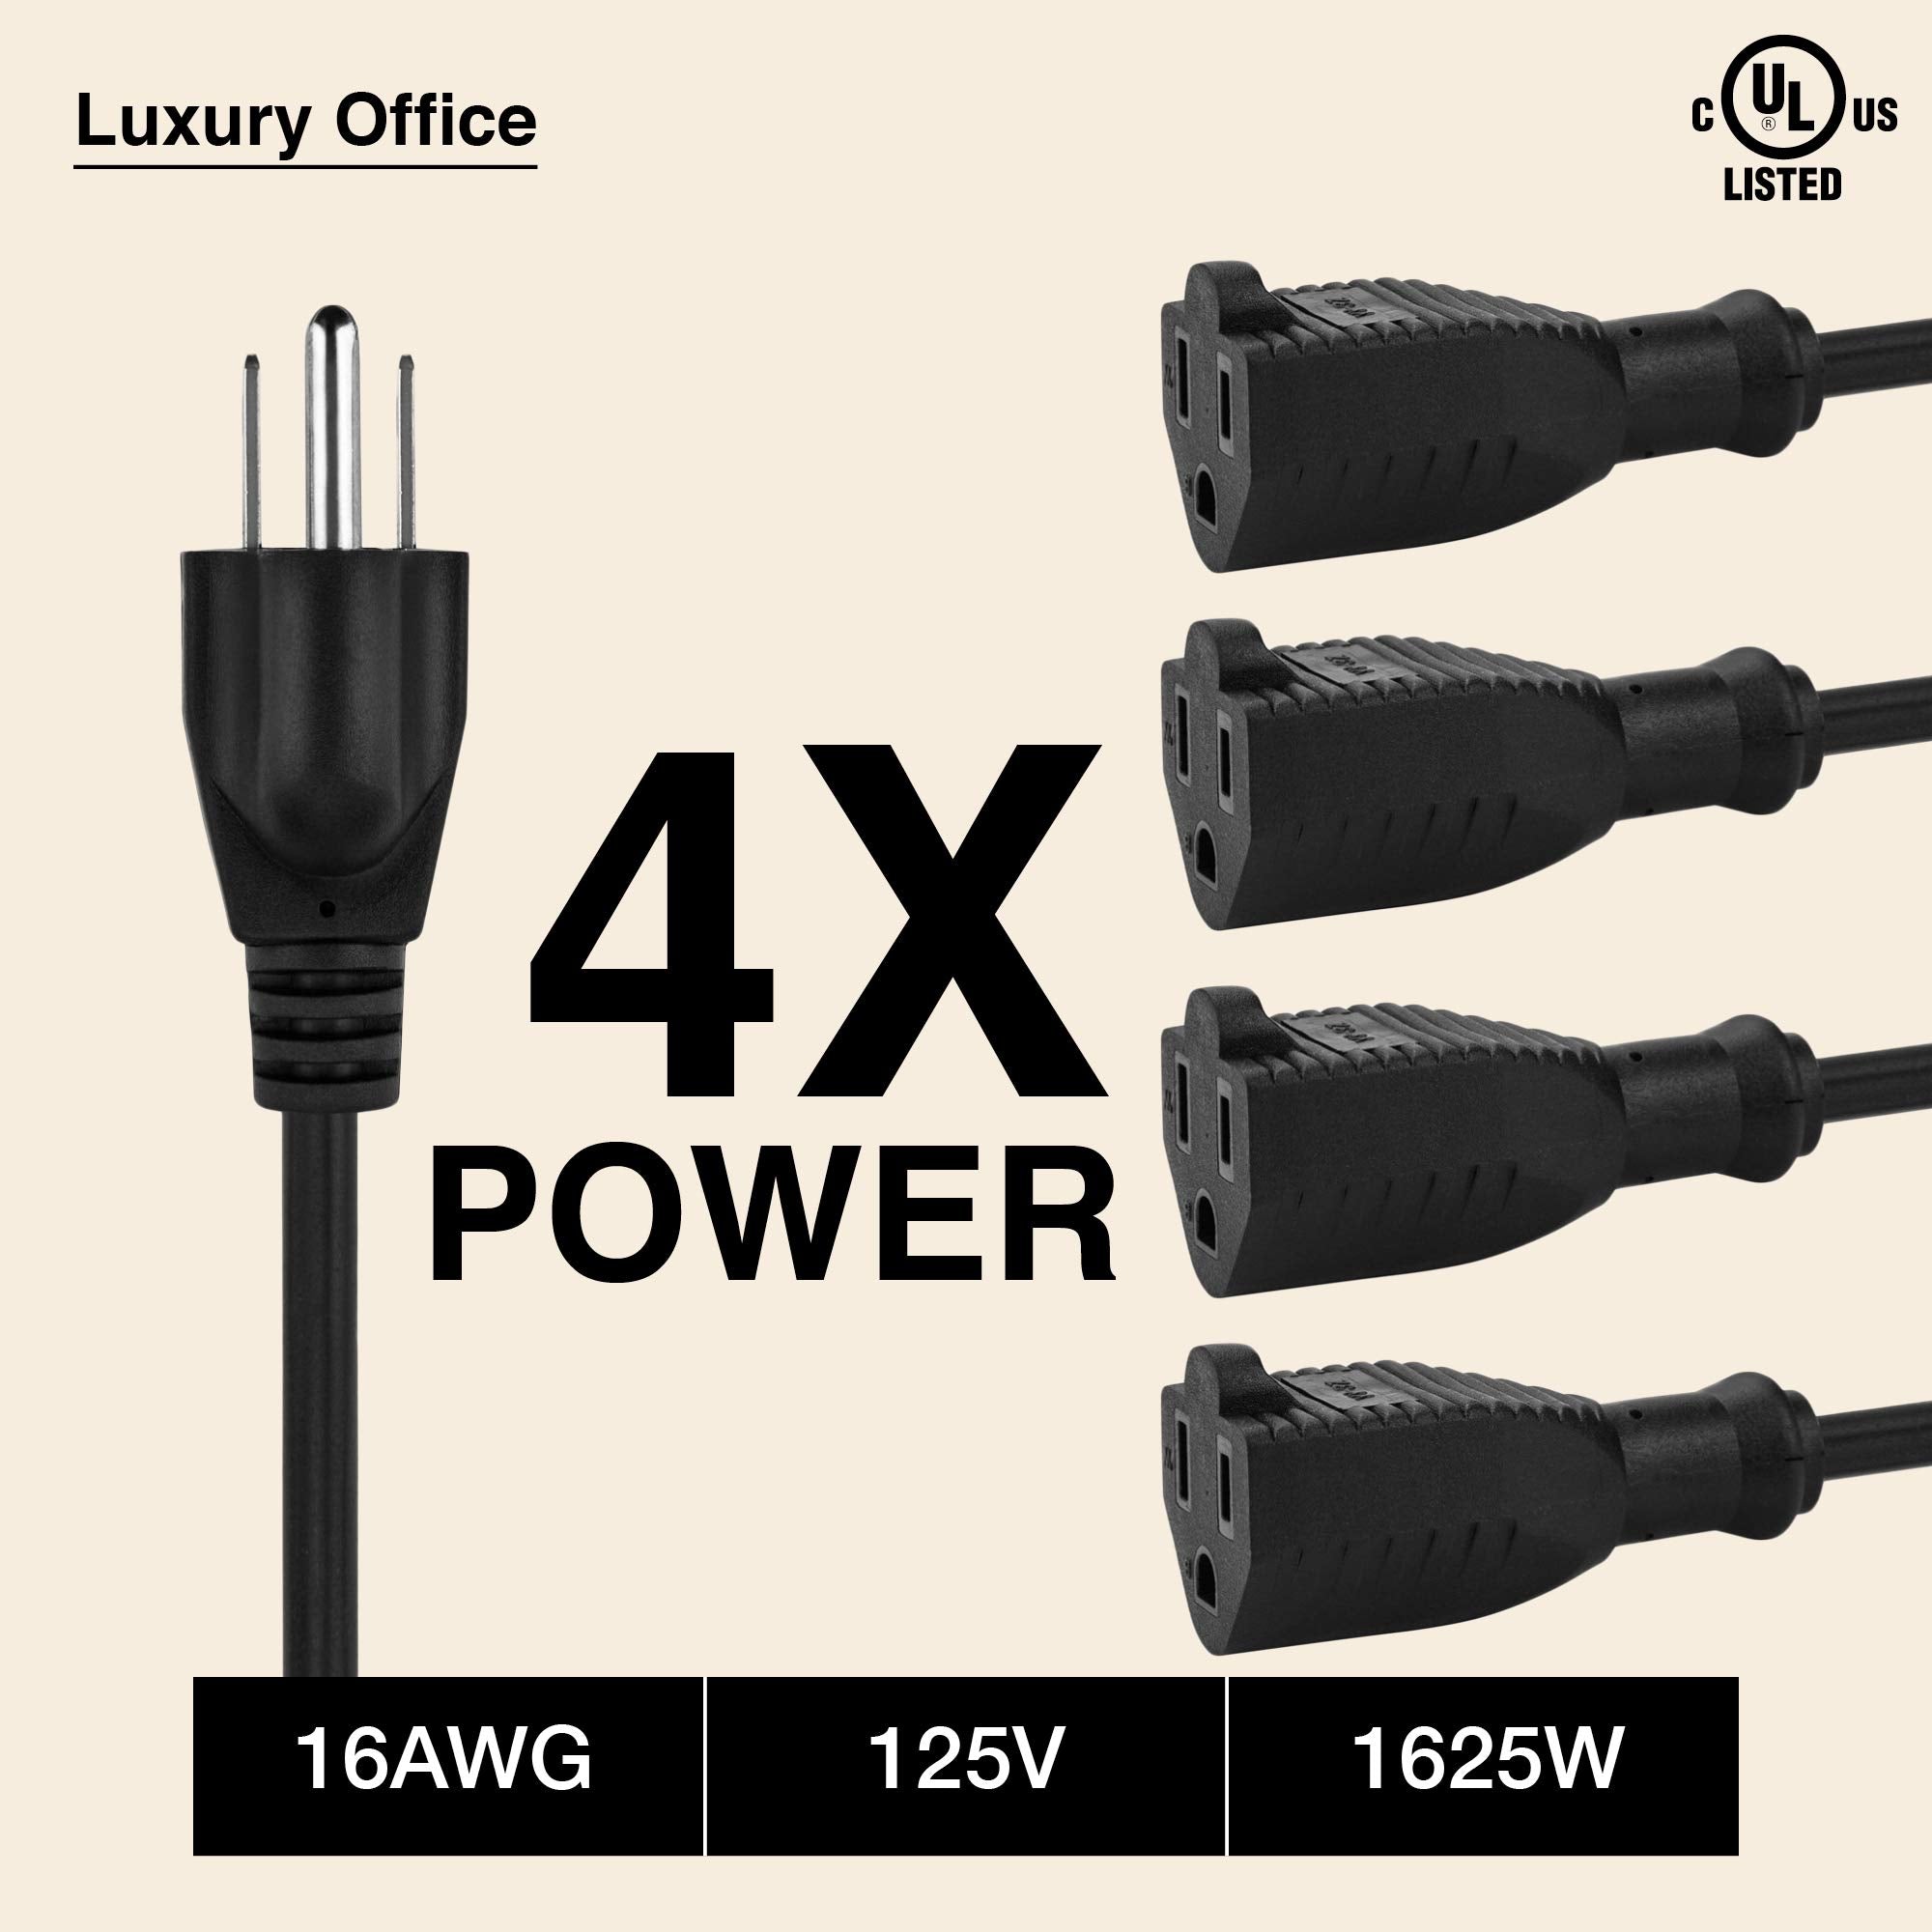 4 Way Power Splitter - 1 to 4 Extension Cord Splitter, 6' Long Extension Cord, Outlet Splitter 3 Prong, Power Strip Outlet Plug, Y Style Extension Cord, Black, SJT 16 AWG by Luxury Office  - Like New